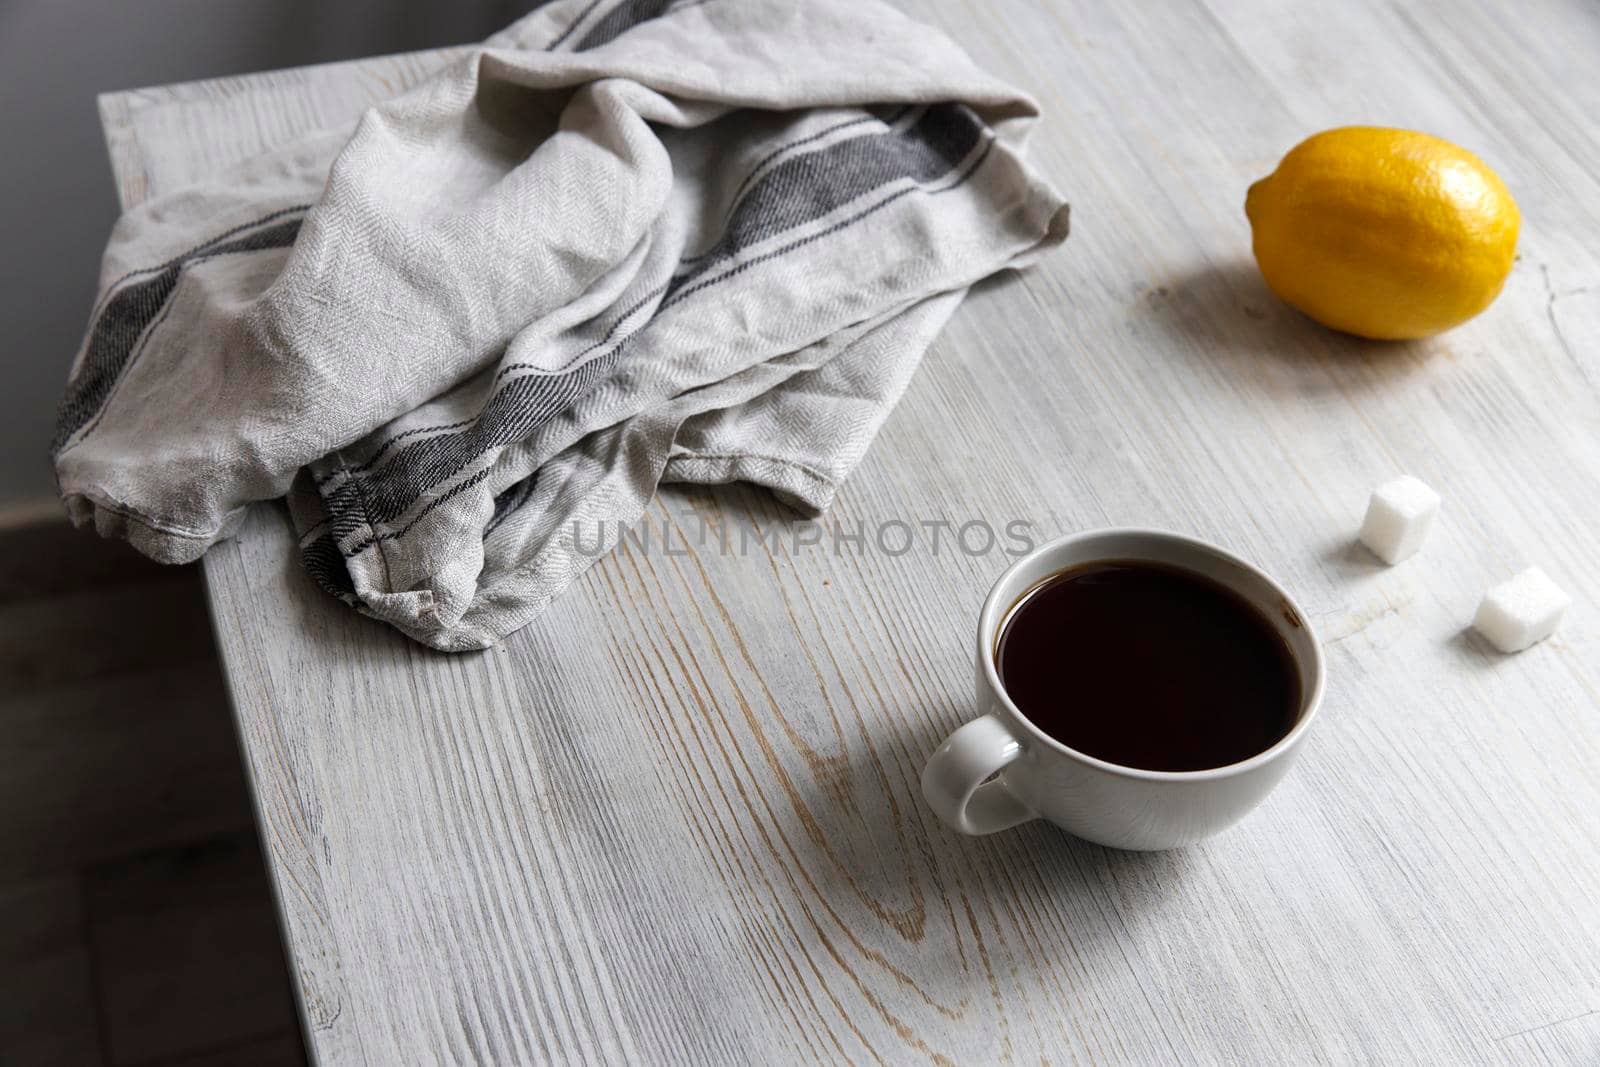 A cup of coffee, two pieces of sugar, a lemon on the table.